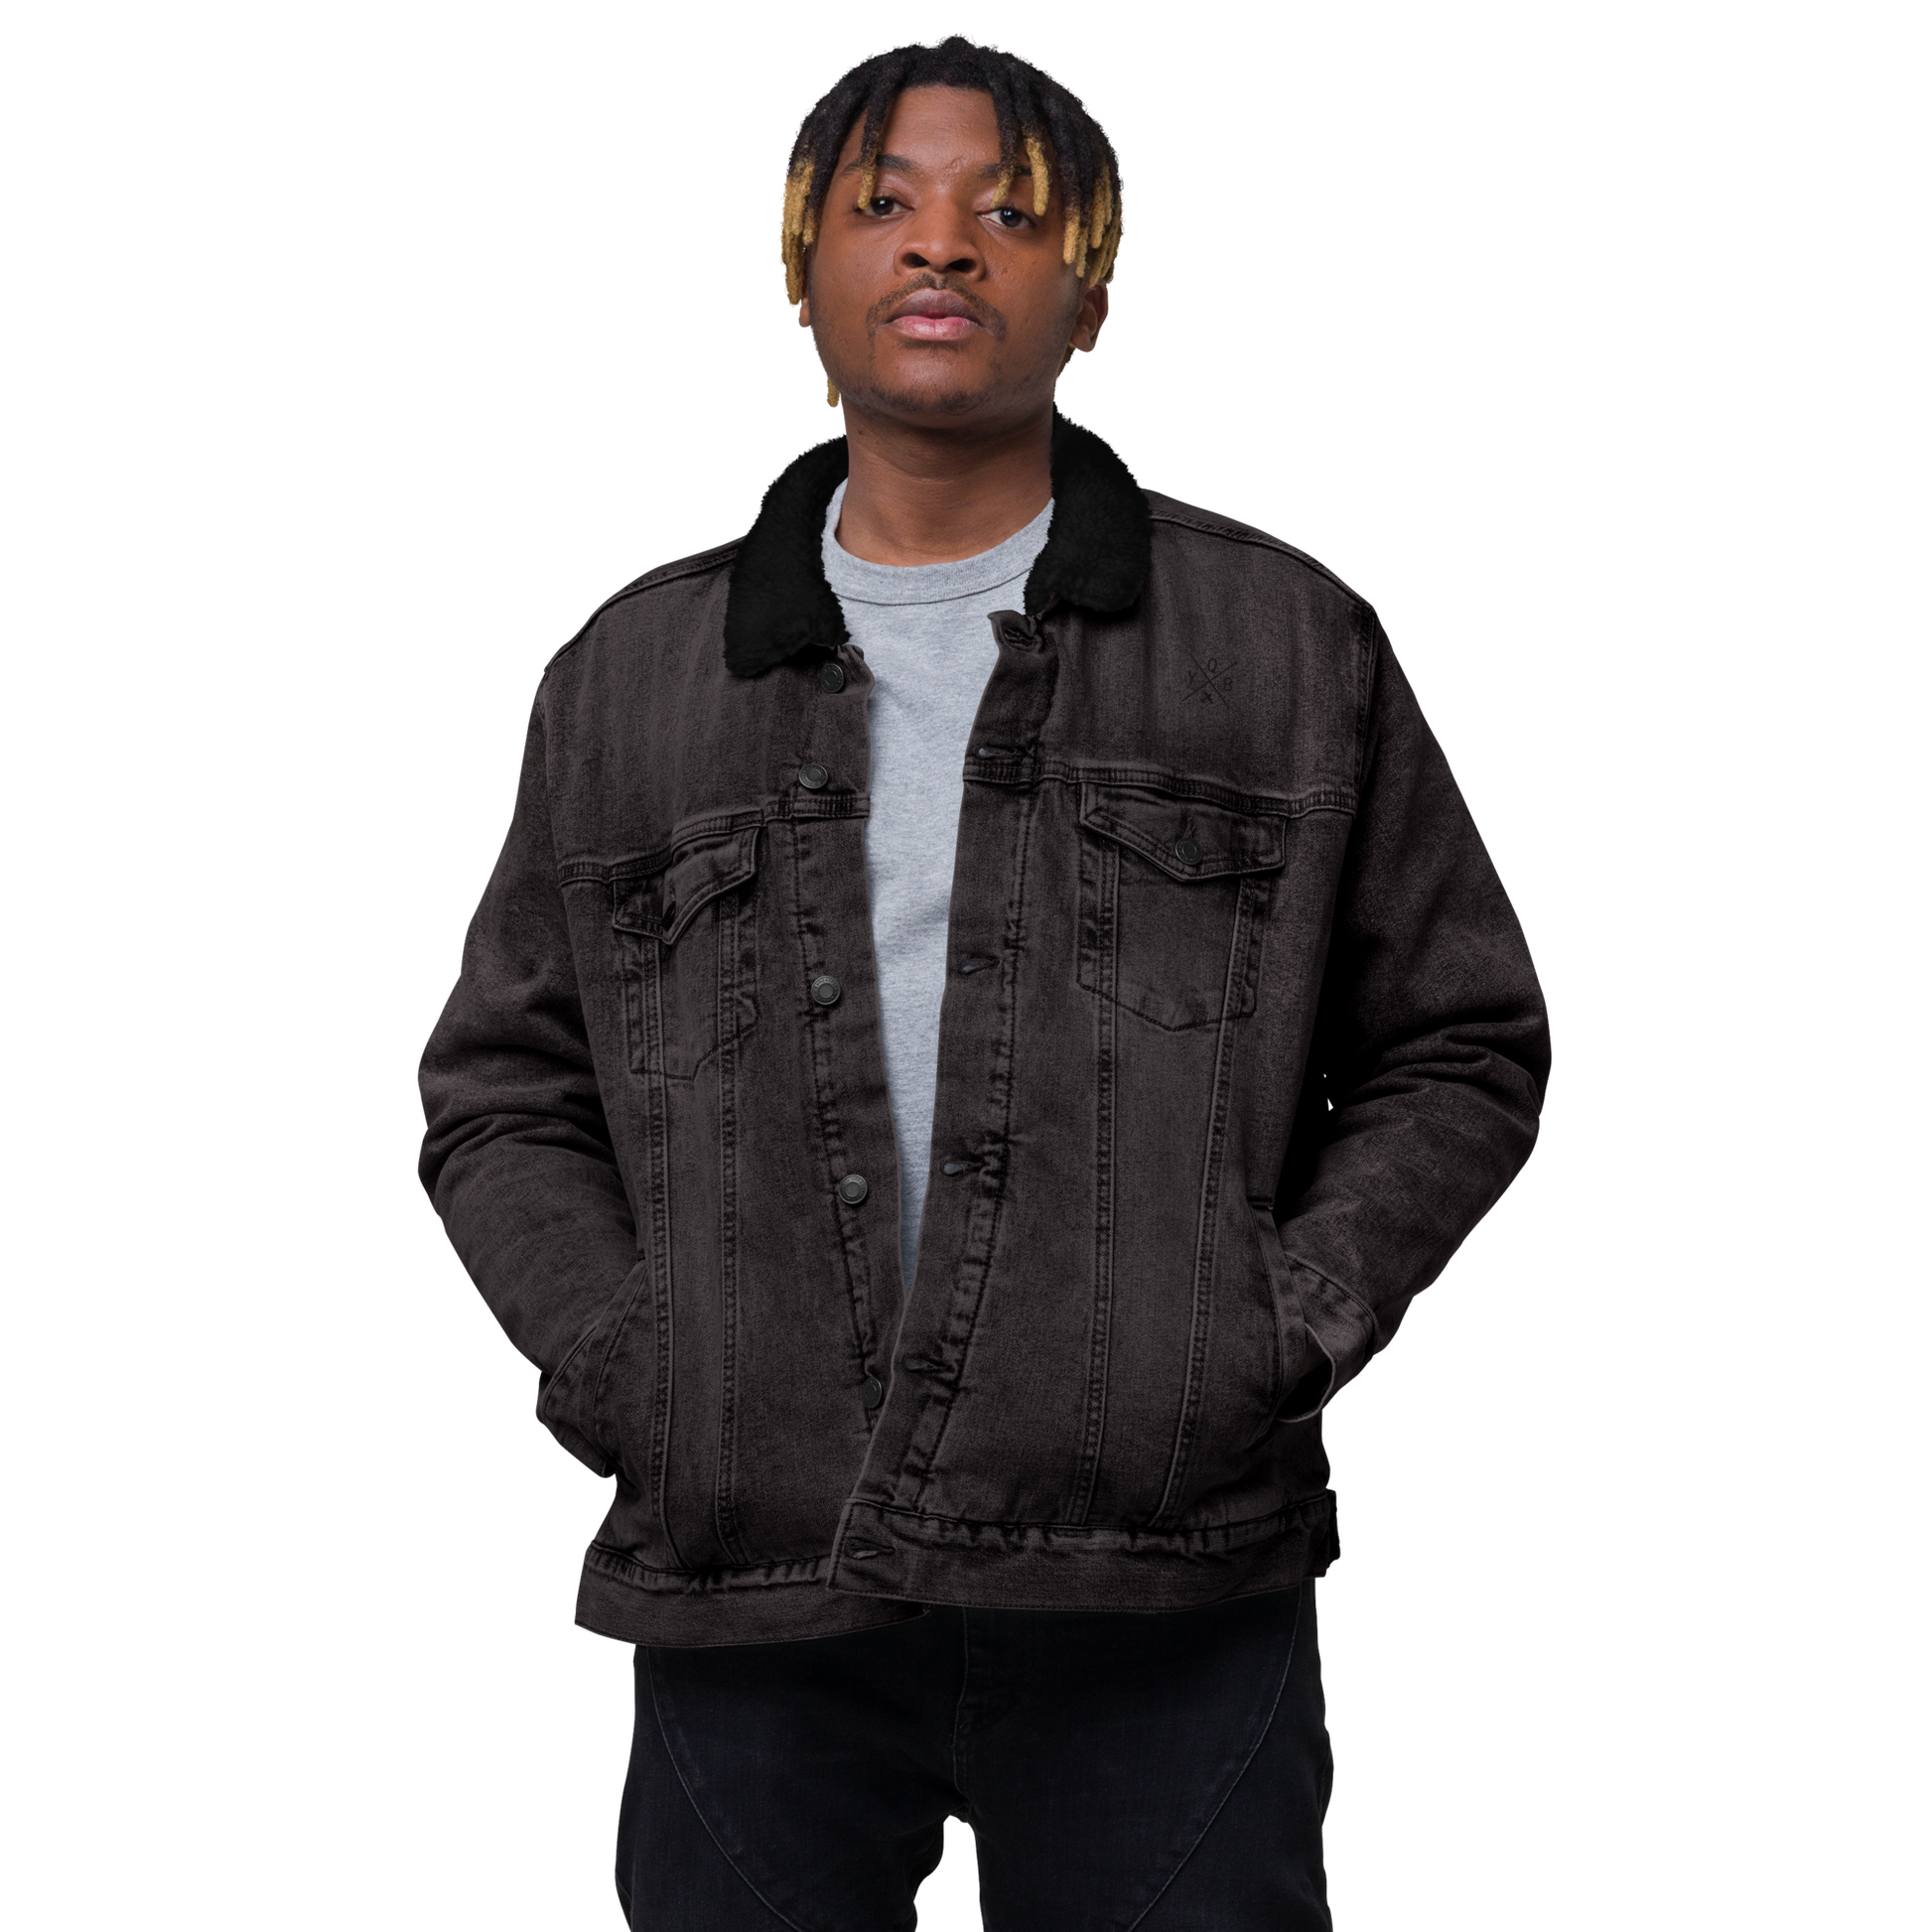 YHM Designs - YQB Quebec City Denim Sherpa Jacket - Crossed-X Design with Airport Code and Vintage Propliner - Black & White Embroidery - Image 01